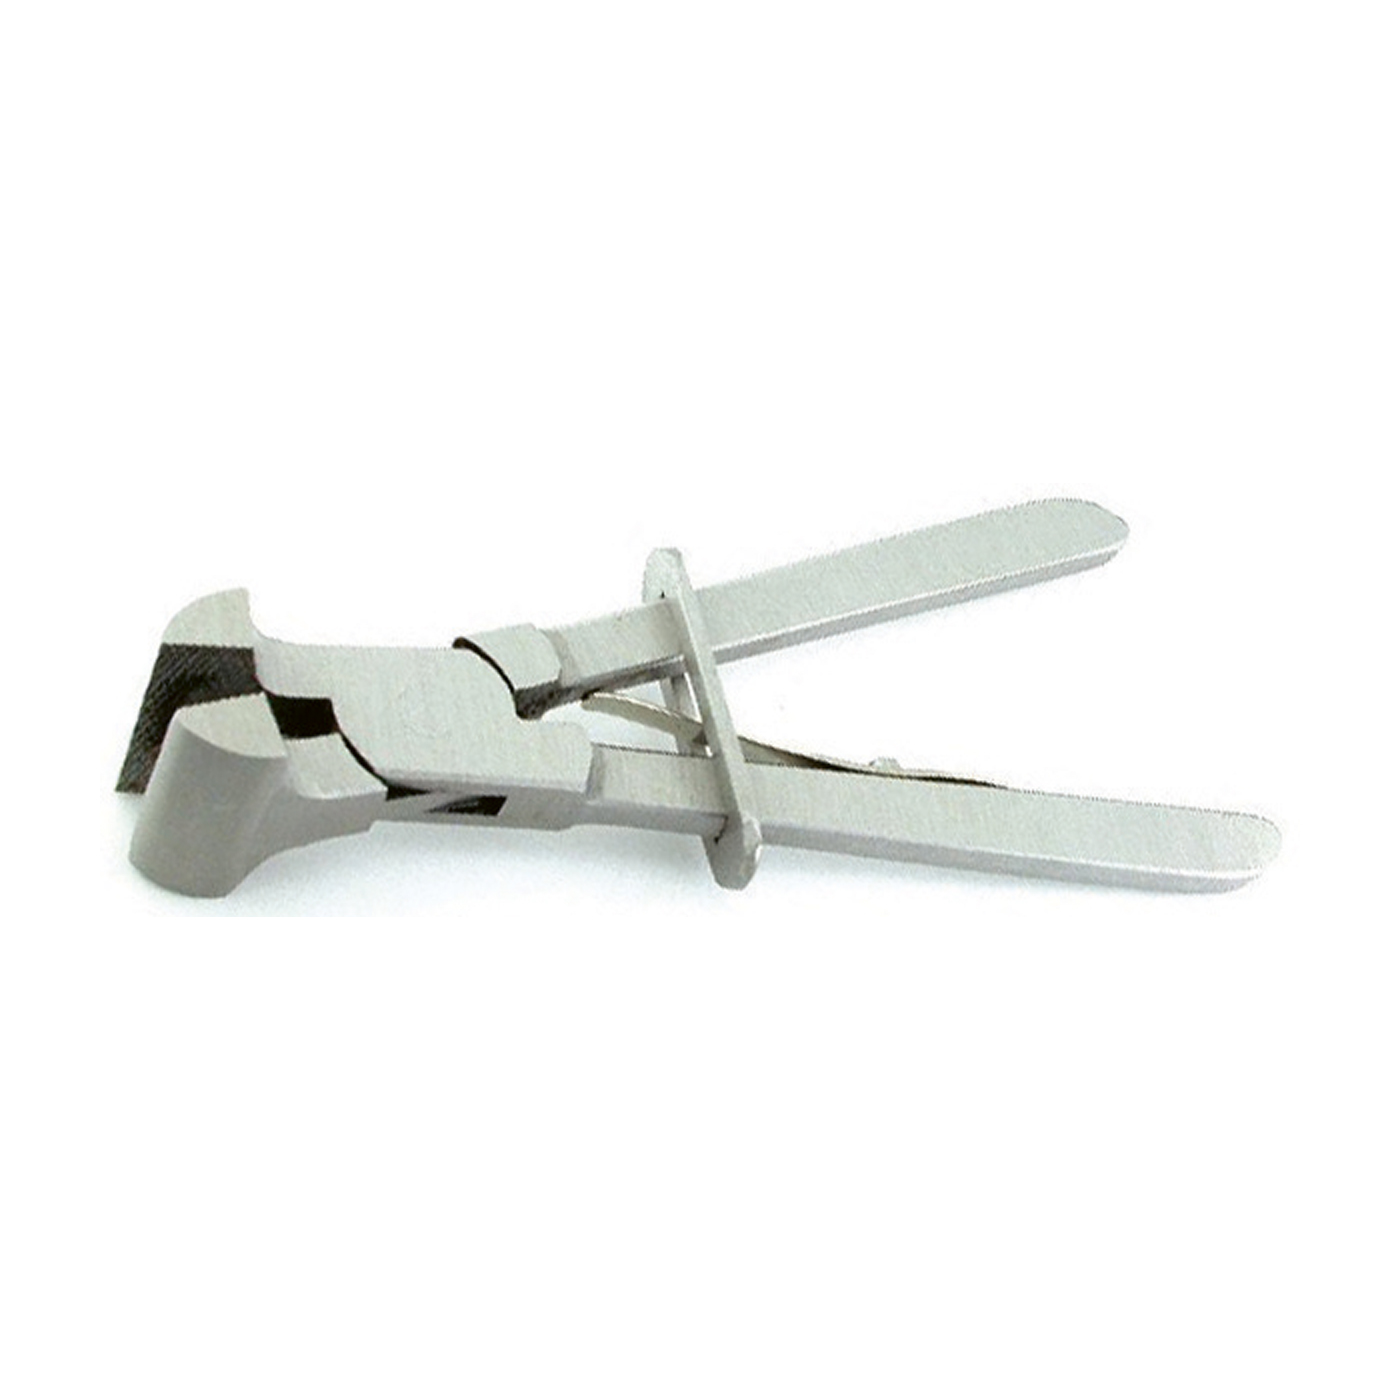 Sliding Pliers, Wide Jaws, with Blow, 130 mm - 1 piece